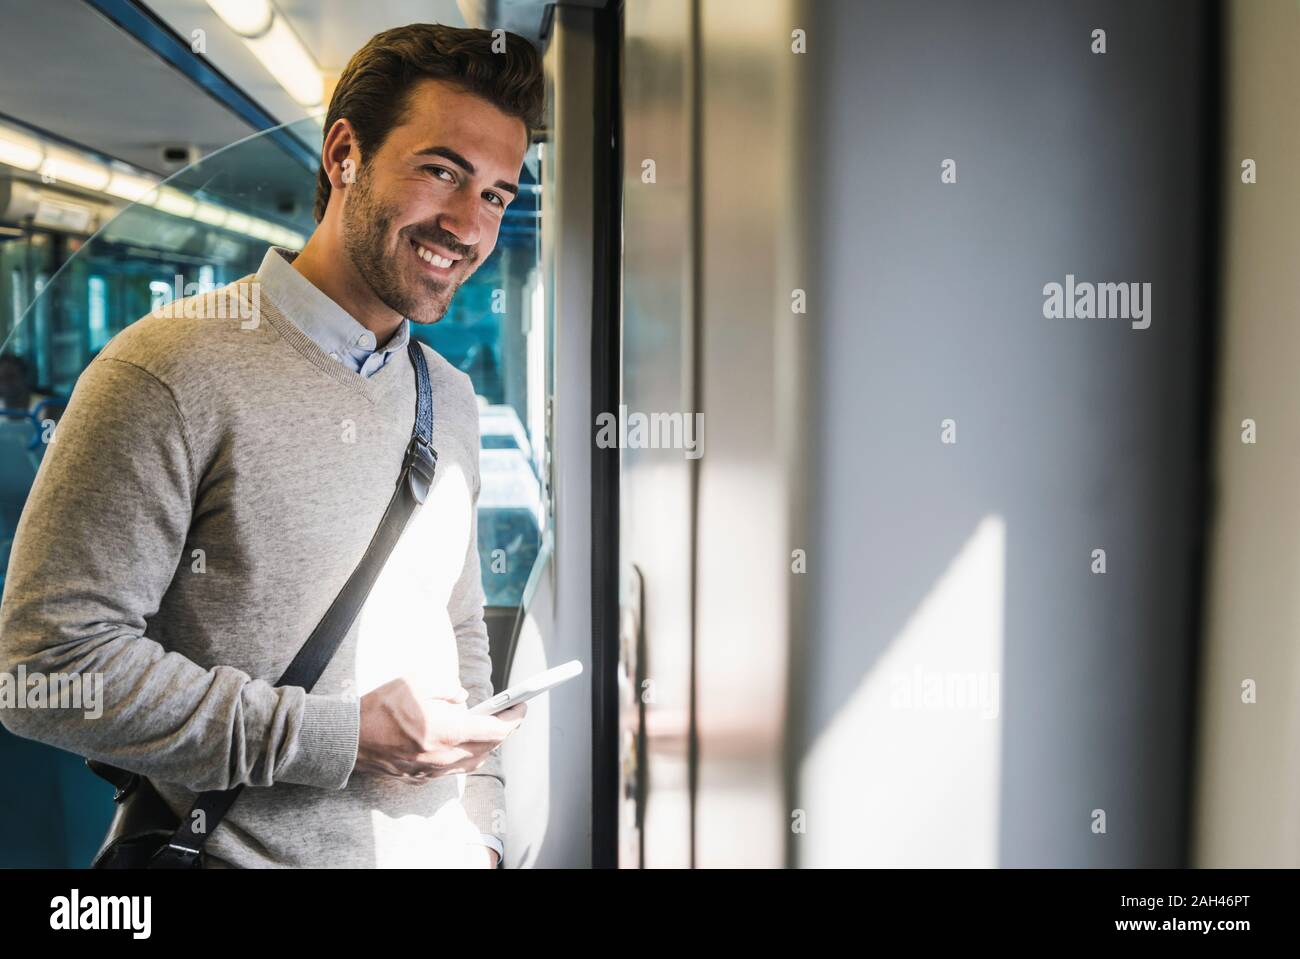 Portrait of smiling young man with smartphone on a train Stock Photo